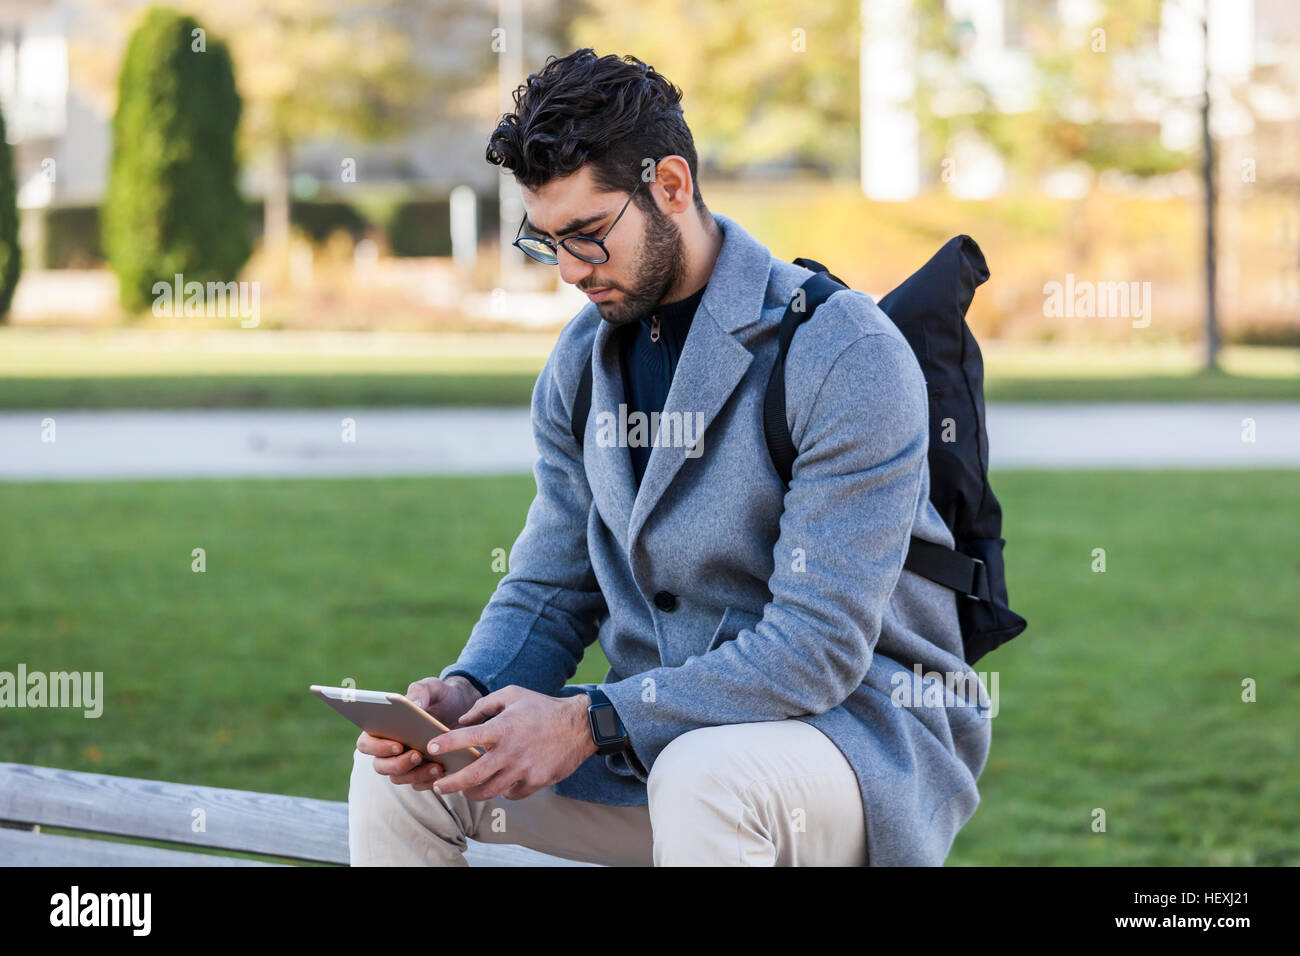 Young man sitting on bench using mini tablet Stock Photo